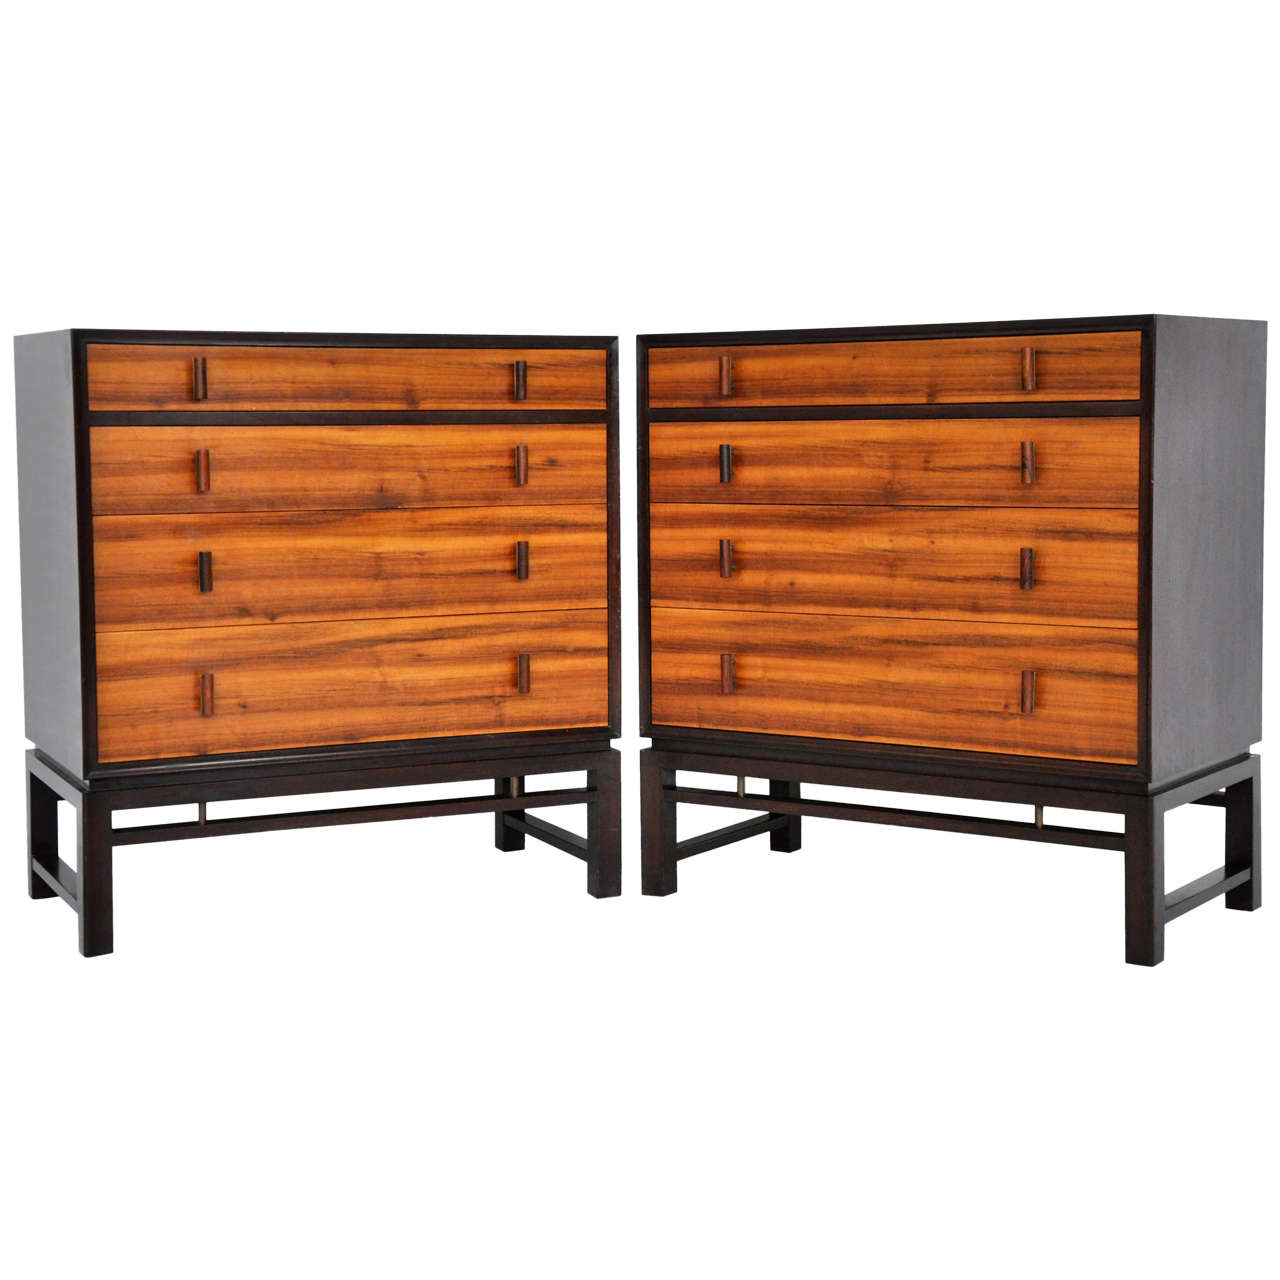 Pair of 4 drawer chest by Edward Wormley for Dunbar.  Dark finish mahogany cases.  French walnut drawers with rosewood pulls.